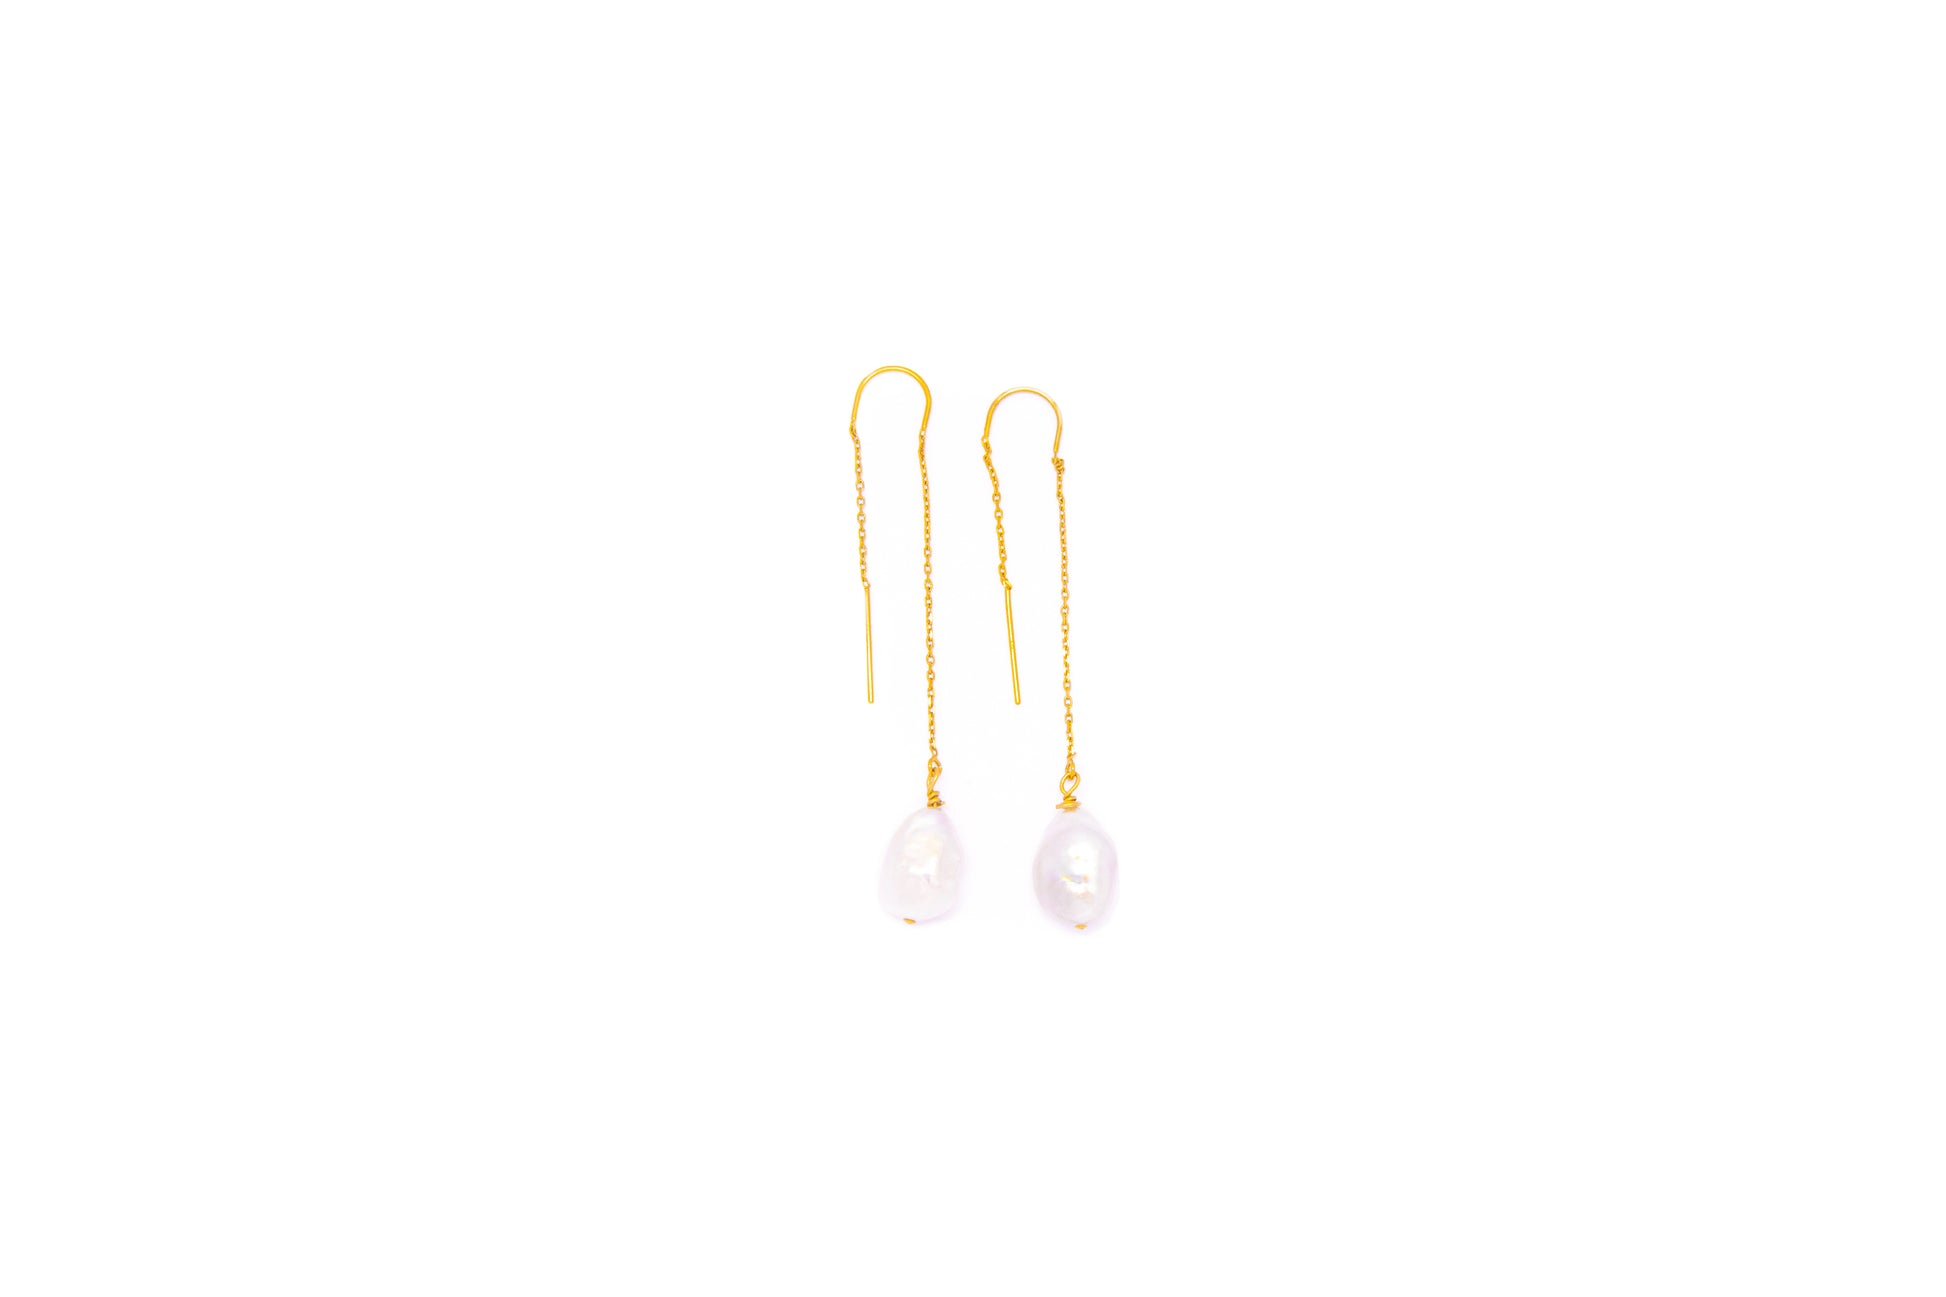 Set of 2 14k Yellow Gold Threader Earrings with White Freshwater Pearl Drops from Arm Candy By Kelly